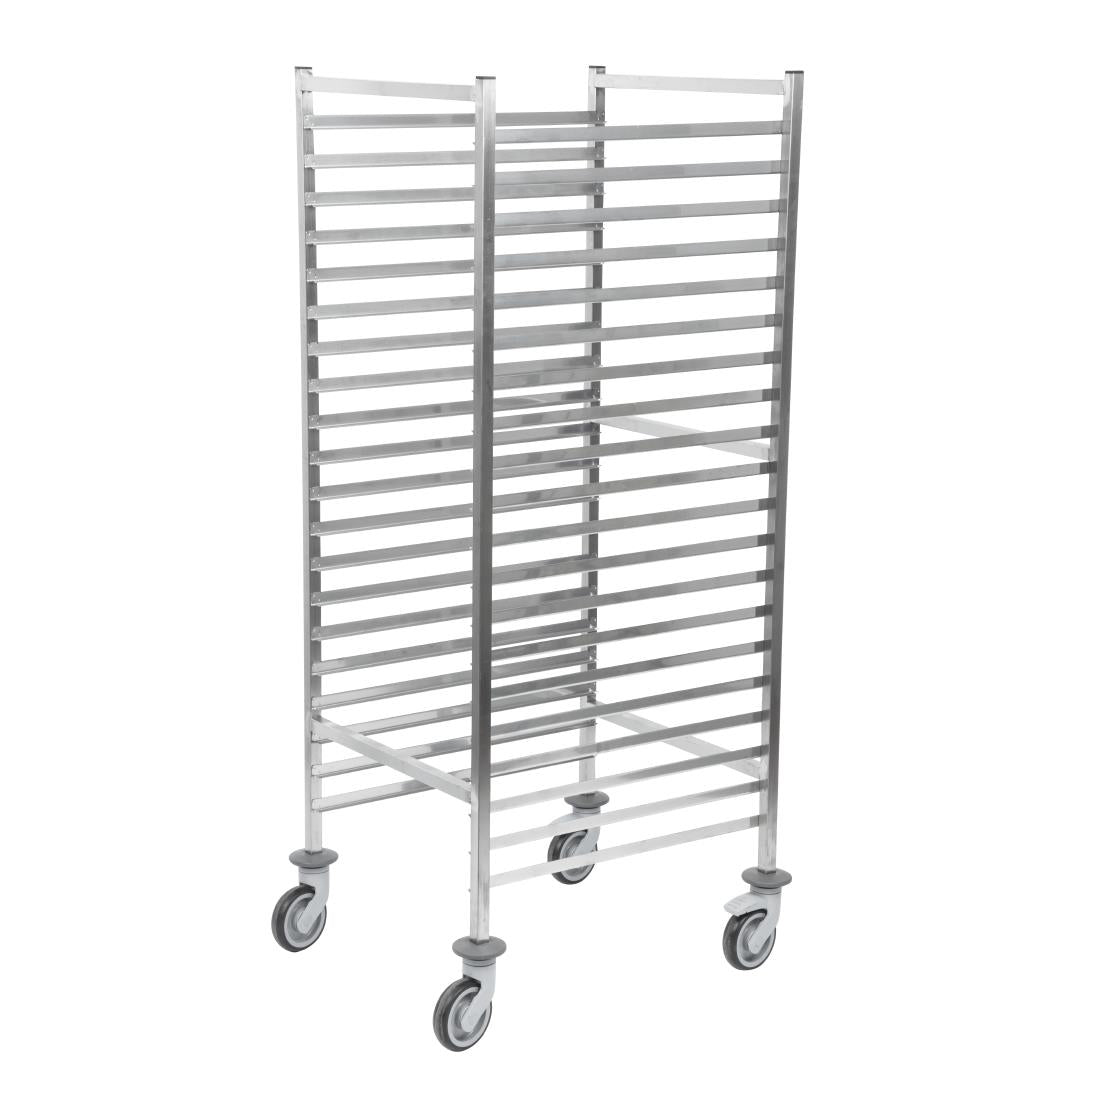 CX725 Matfer Bourgeat 20 Level Gastronorm Racking Trolley 2/1GN JD Catering Equipment Solutions Ltd